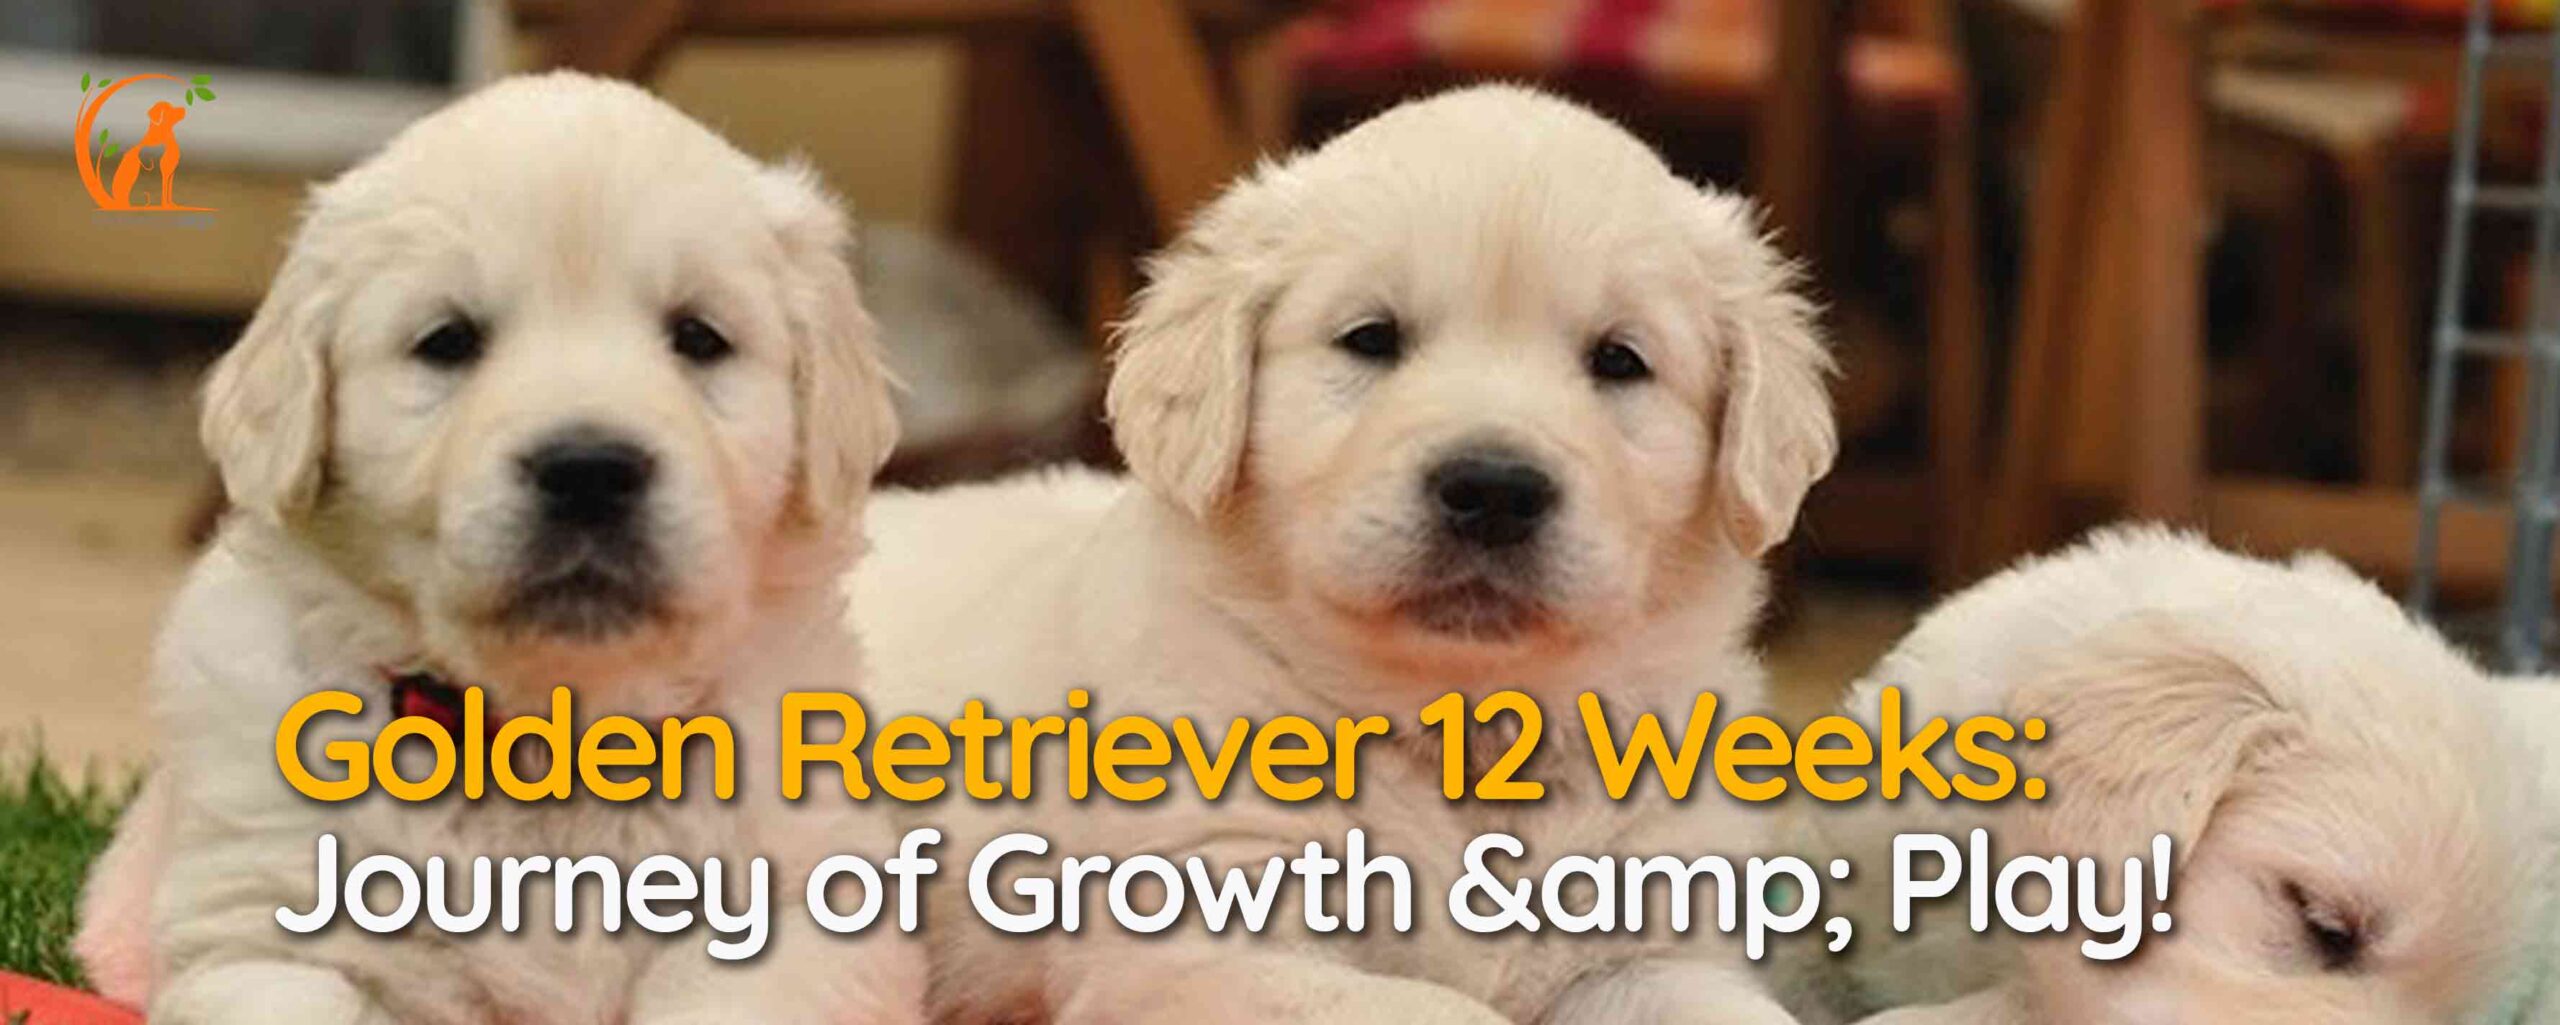 Golden Retriever 12 Weeks: Journey of Growth & Play!